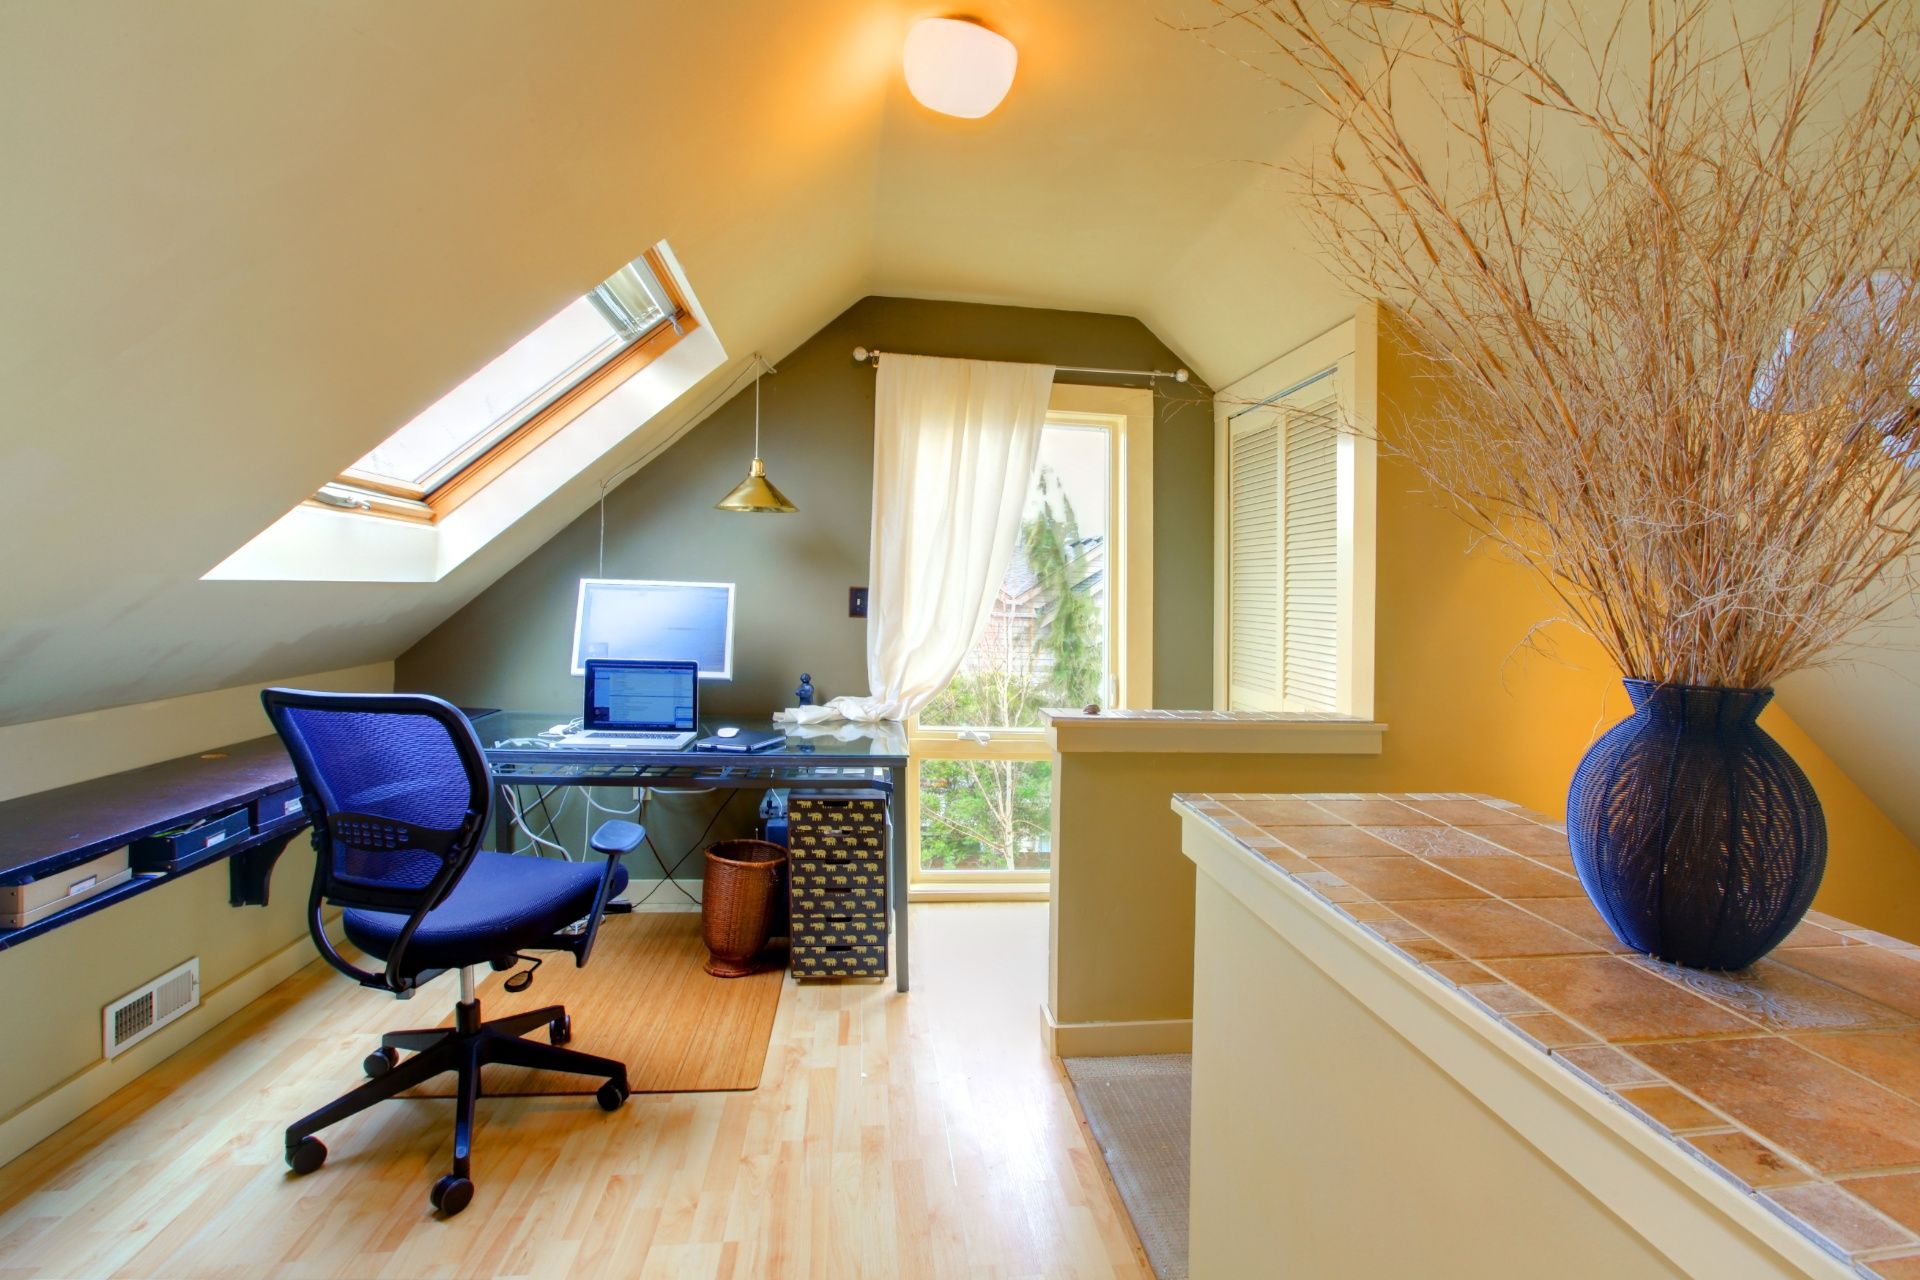 Productive office space in attic